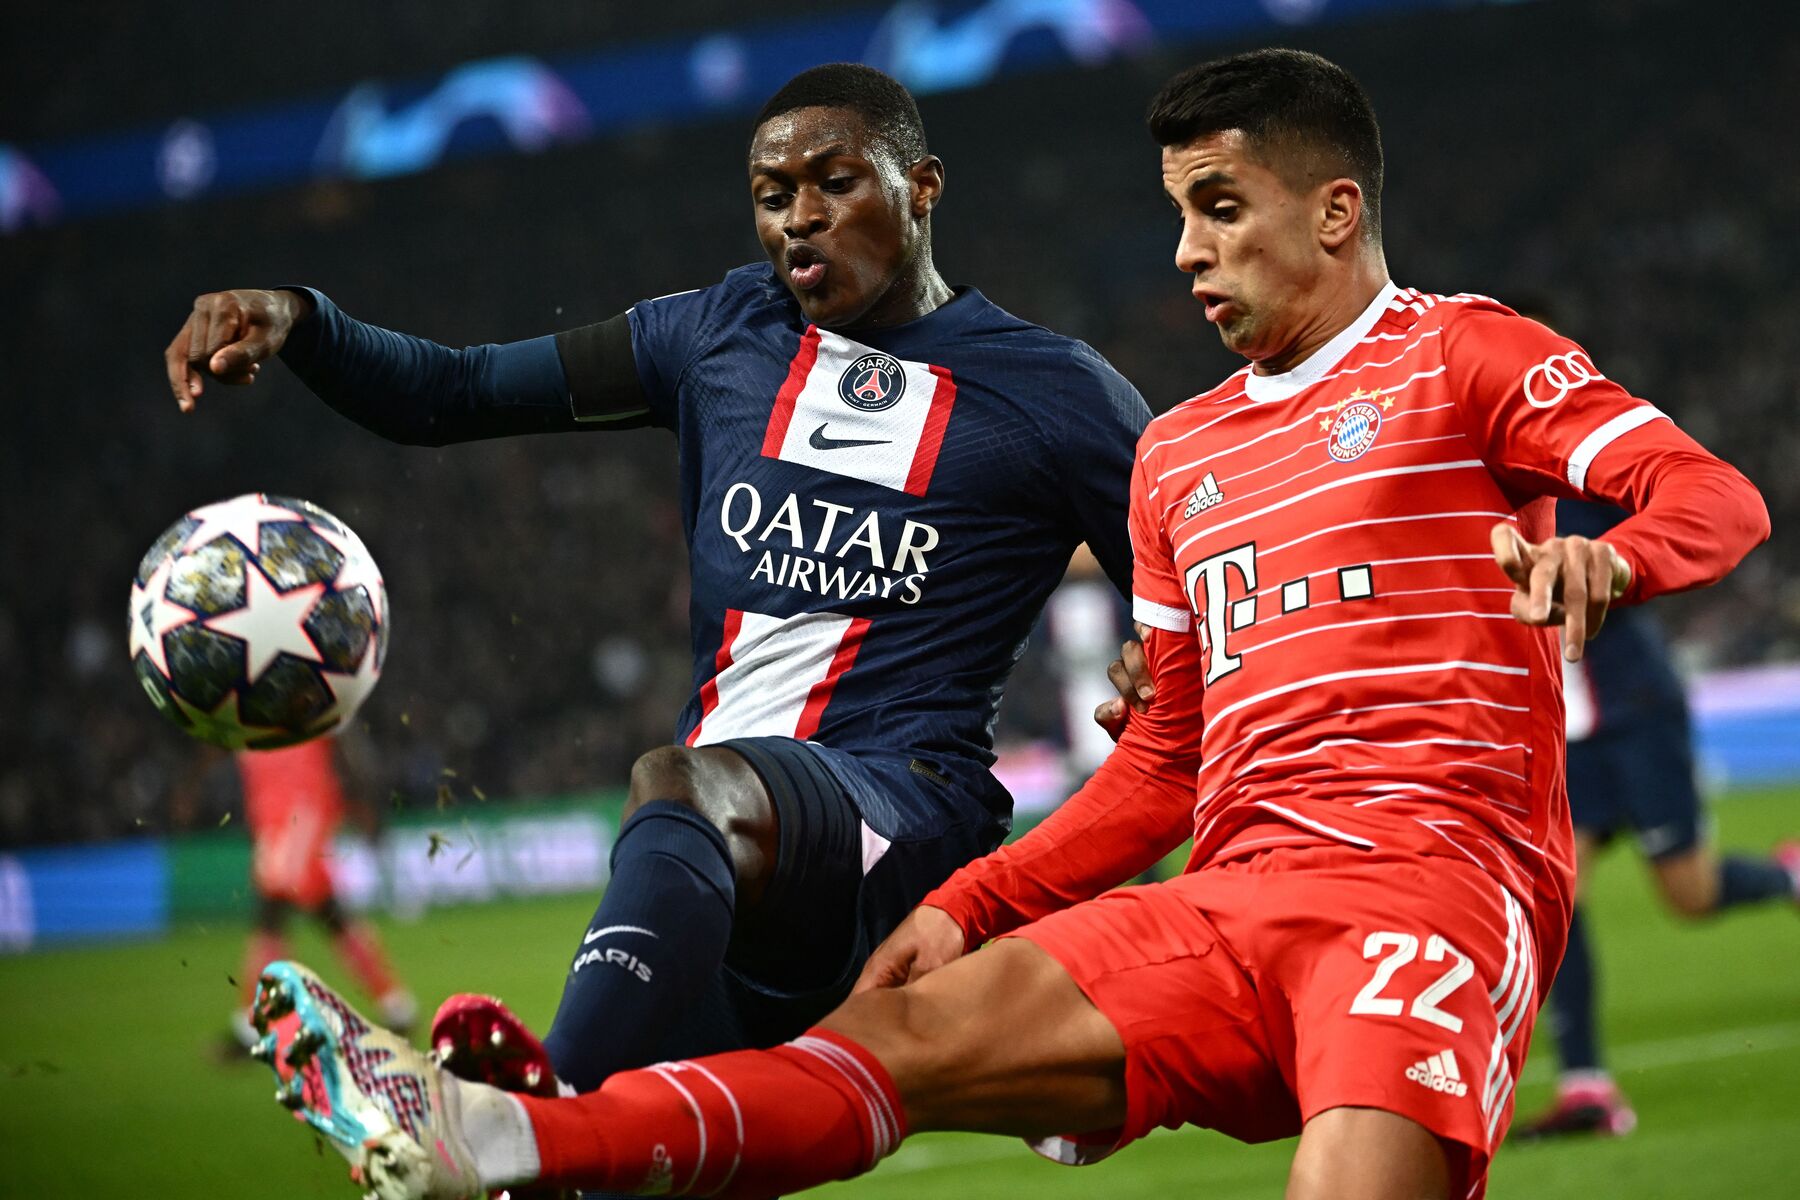 Bayern Munich Defender Cancelo Shares Just What Is Most Difficult About Facing Messi, PSG - PSG Talk